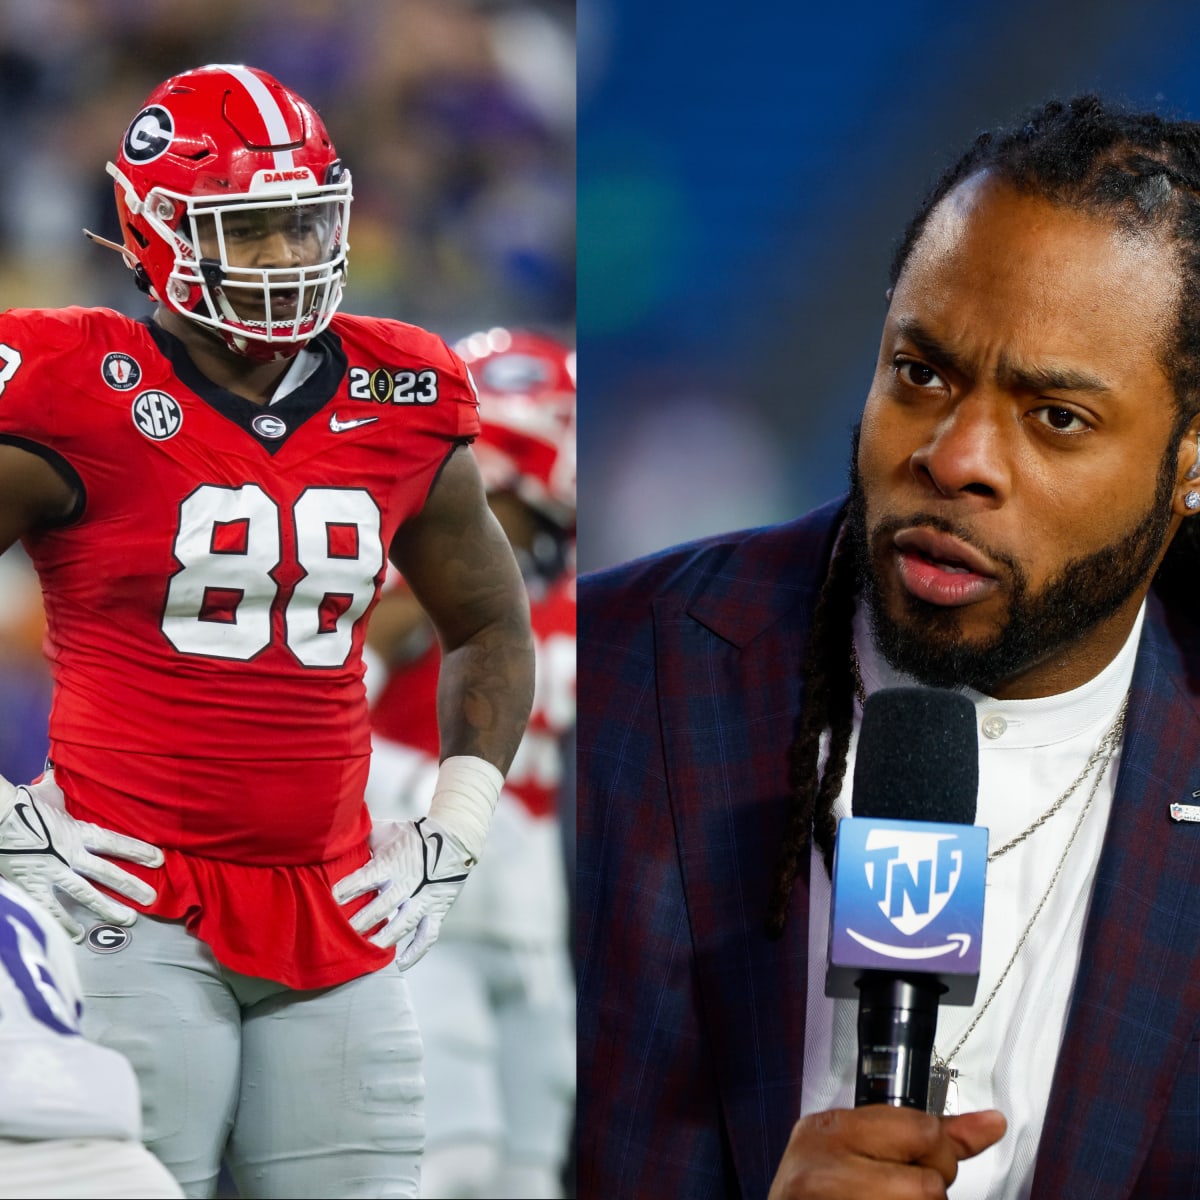 Georgia defensive tackle Jalen Carter goes No. 5 to Seattle Seahawks